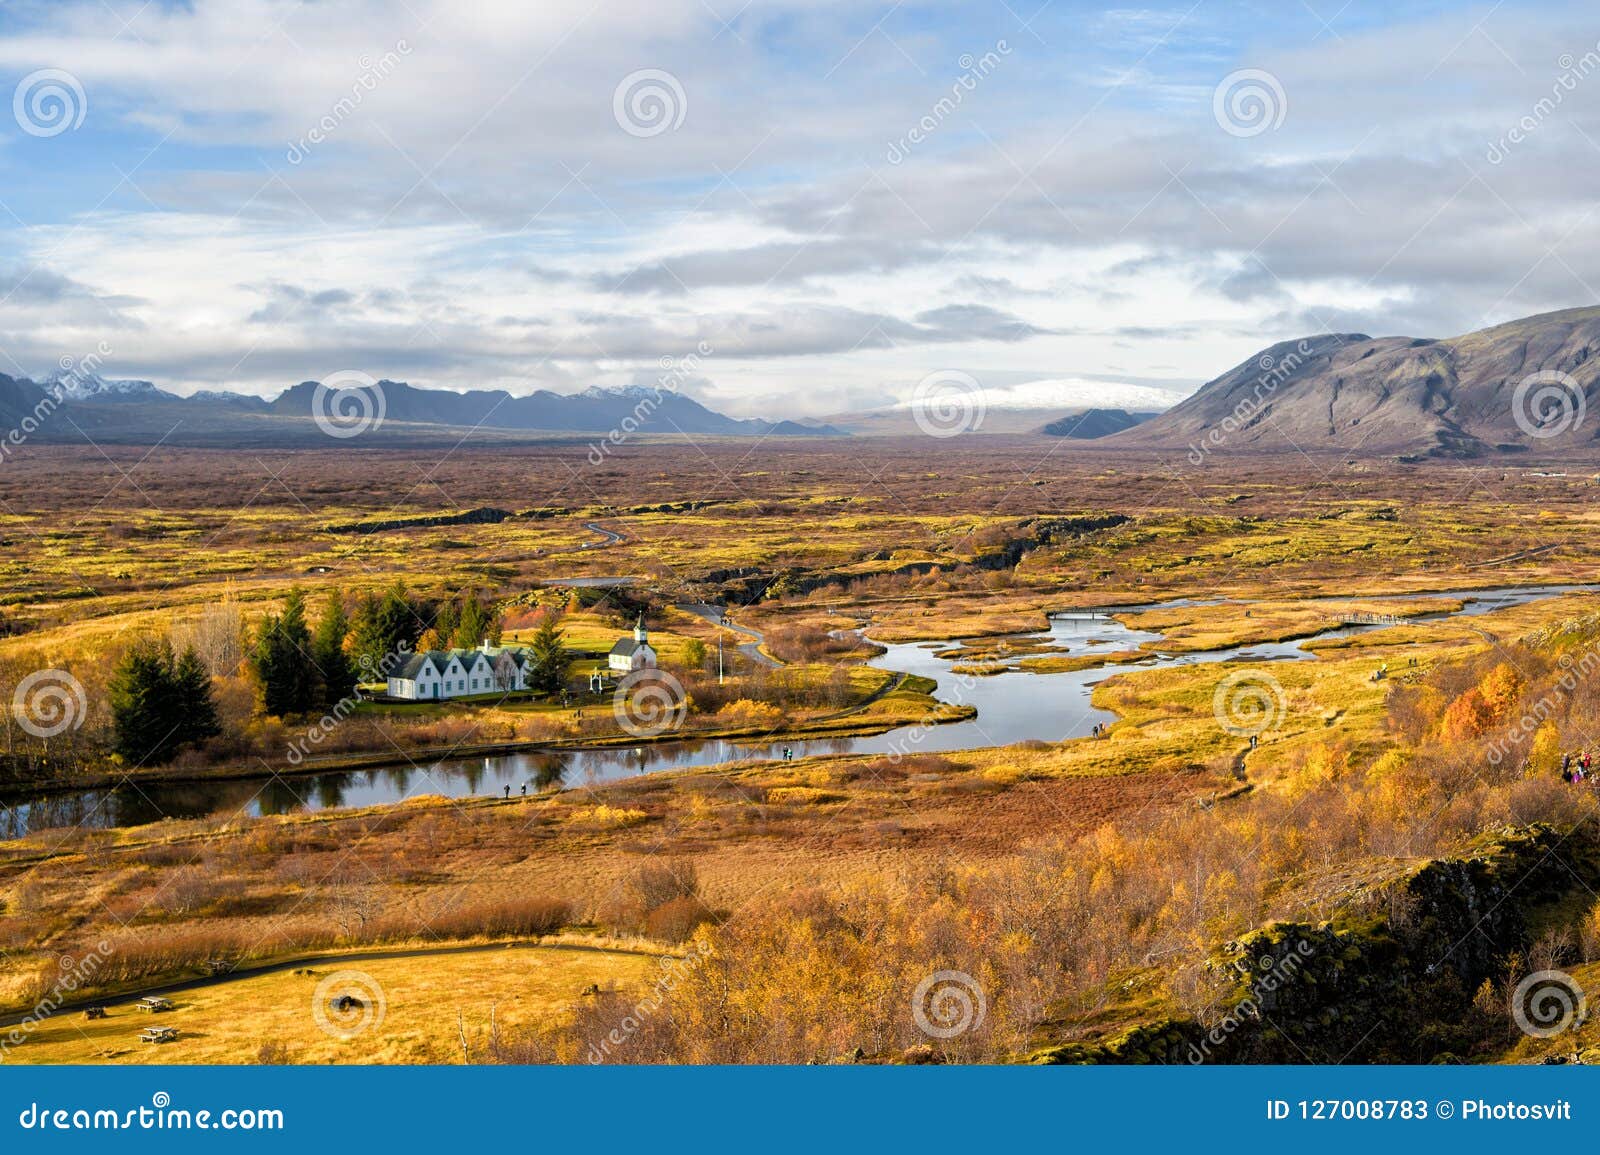 Haukadalur Valley in Iceland. Beautiful Landscape with River in Valley